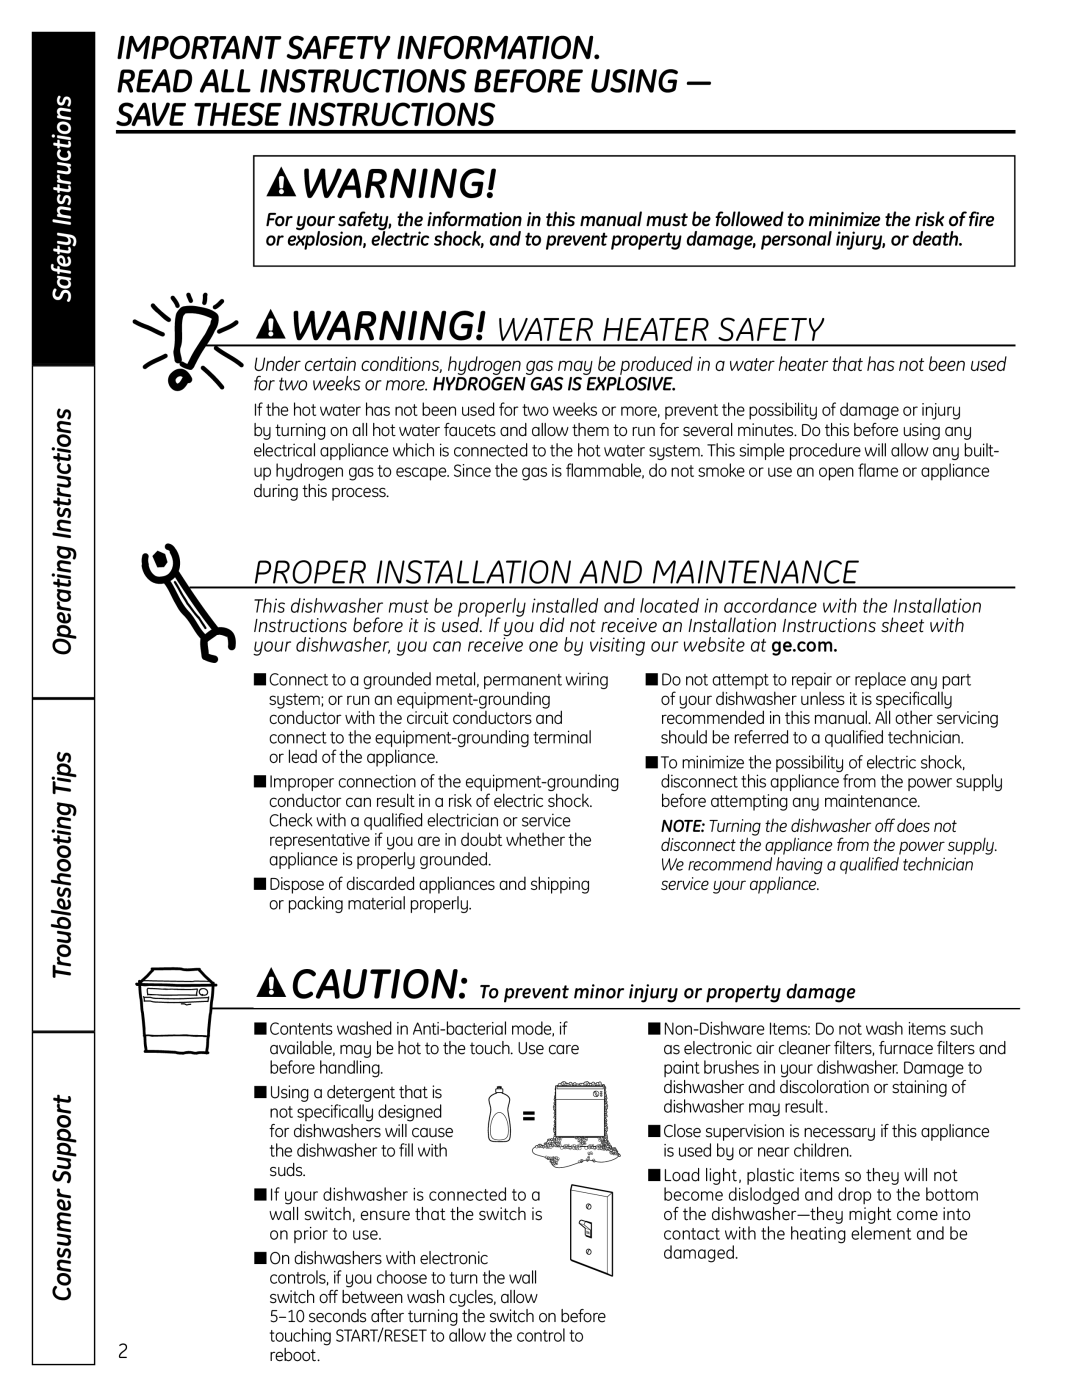 GE CDW9000 Series, GLD8000 Series Important Safety Information Read All Instructions Before Using, Save These Instructions 